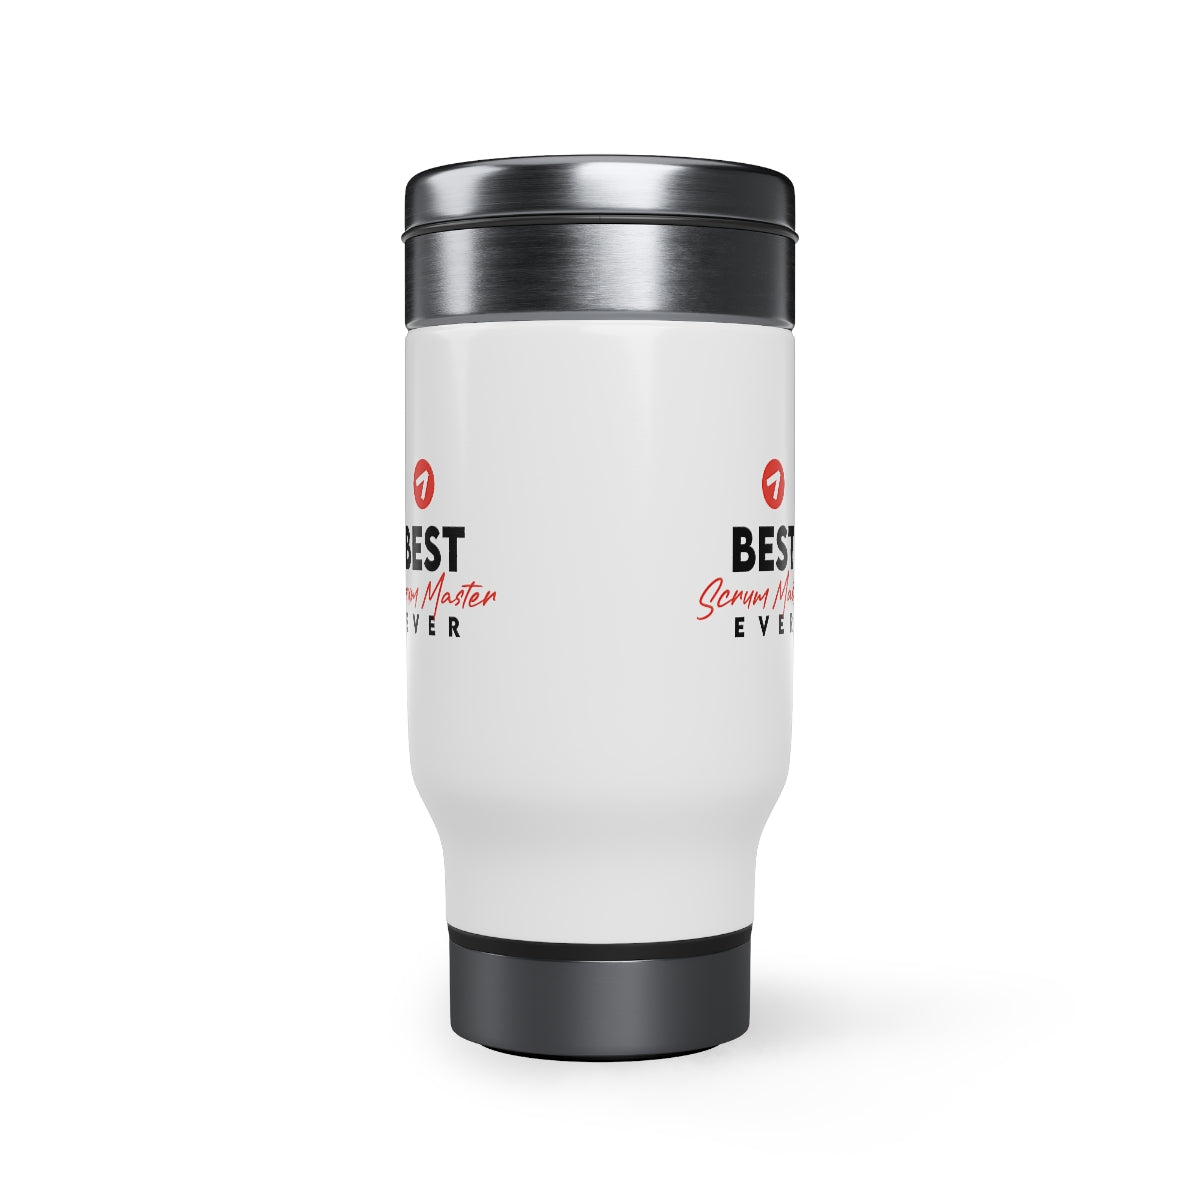 Best Scrum Master ever - Red - Stainless Steel Travel Mug with Handle, 14oz